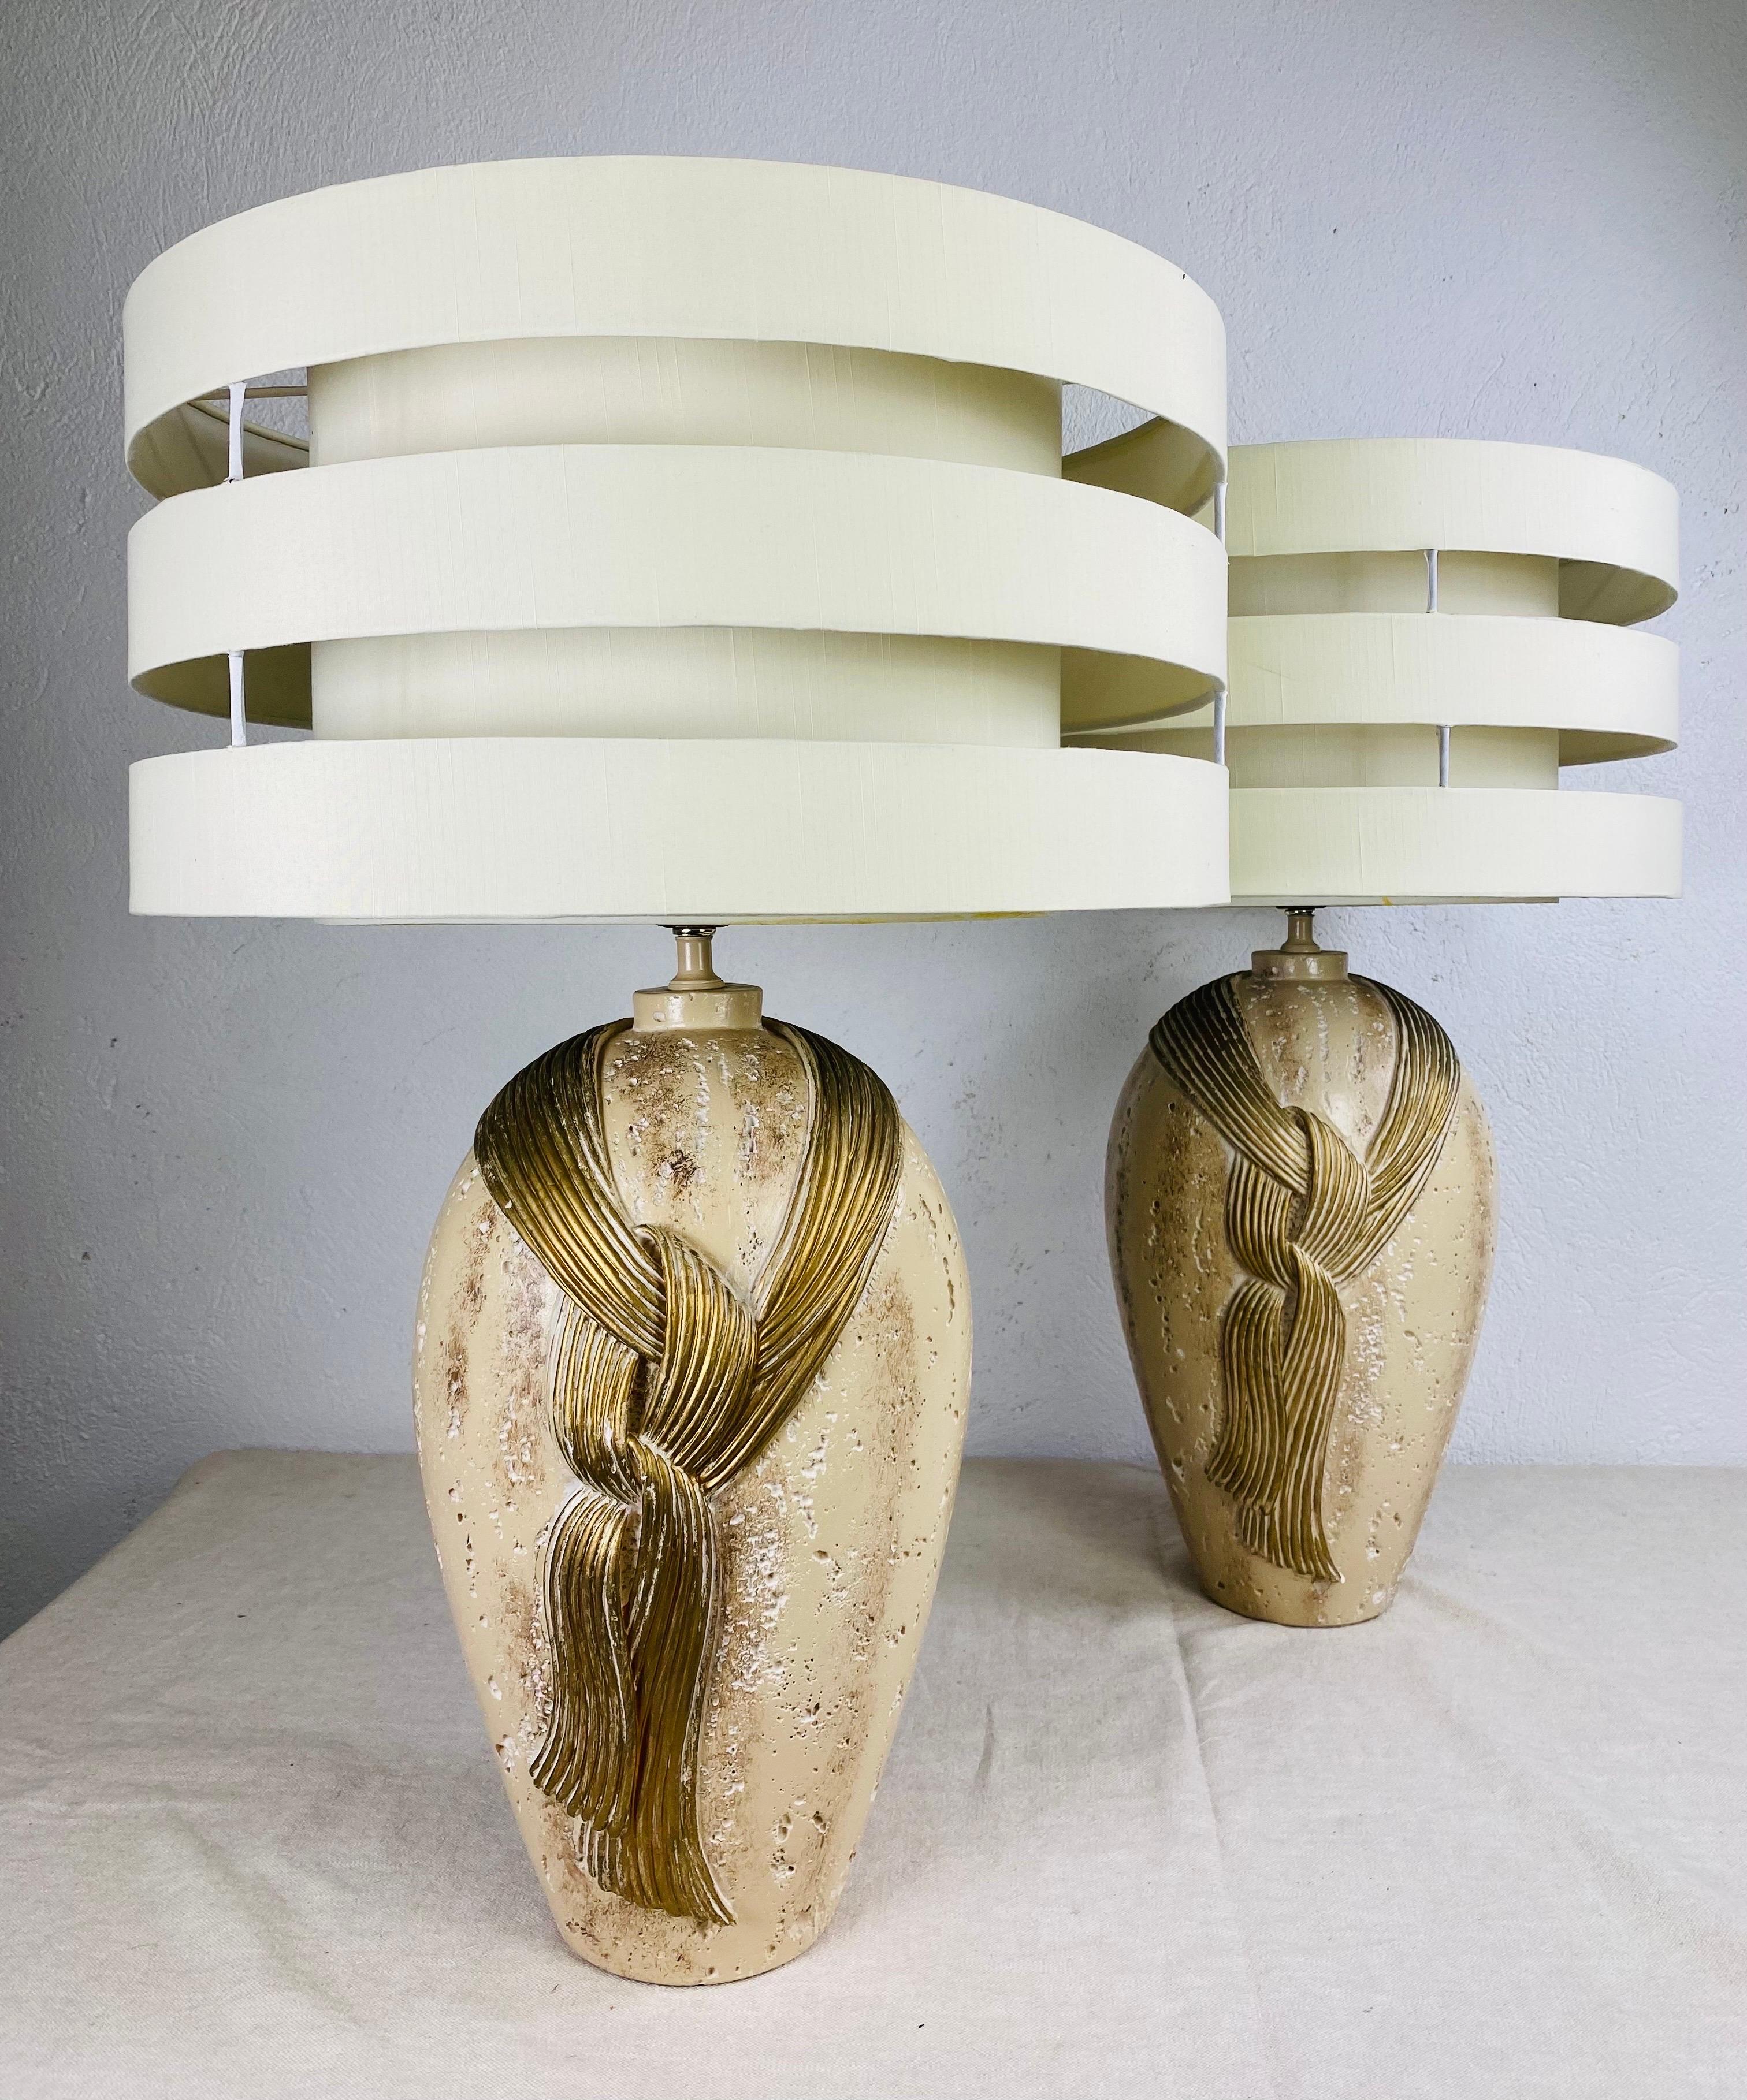 Mid-20th Century Art Deco Inspired Plaster Table Lamps with Custom Shades For Sale 9